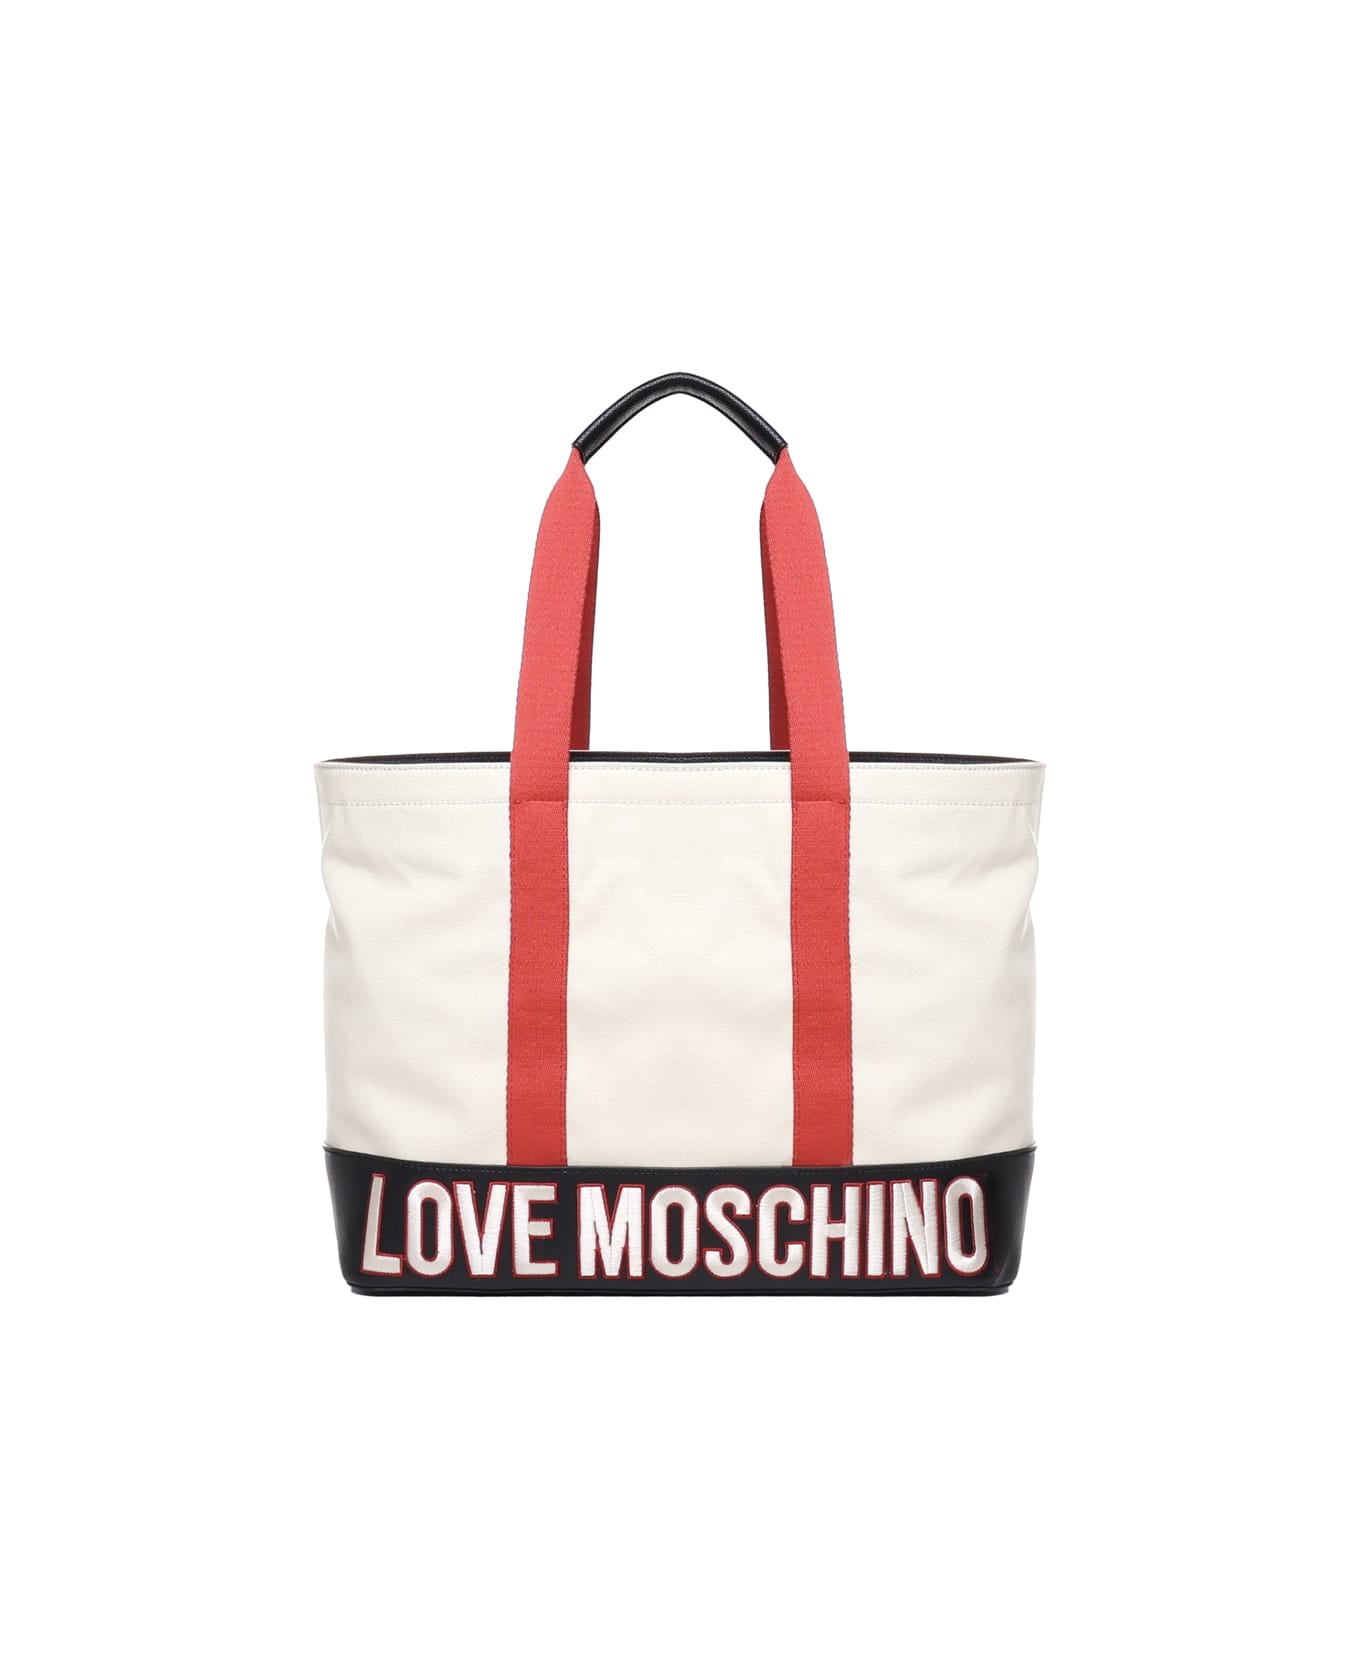 Love Moschino Cotton Free Time Shopping Bag - White, red, black